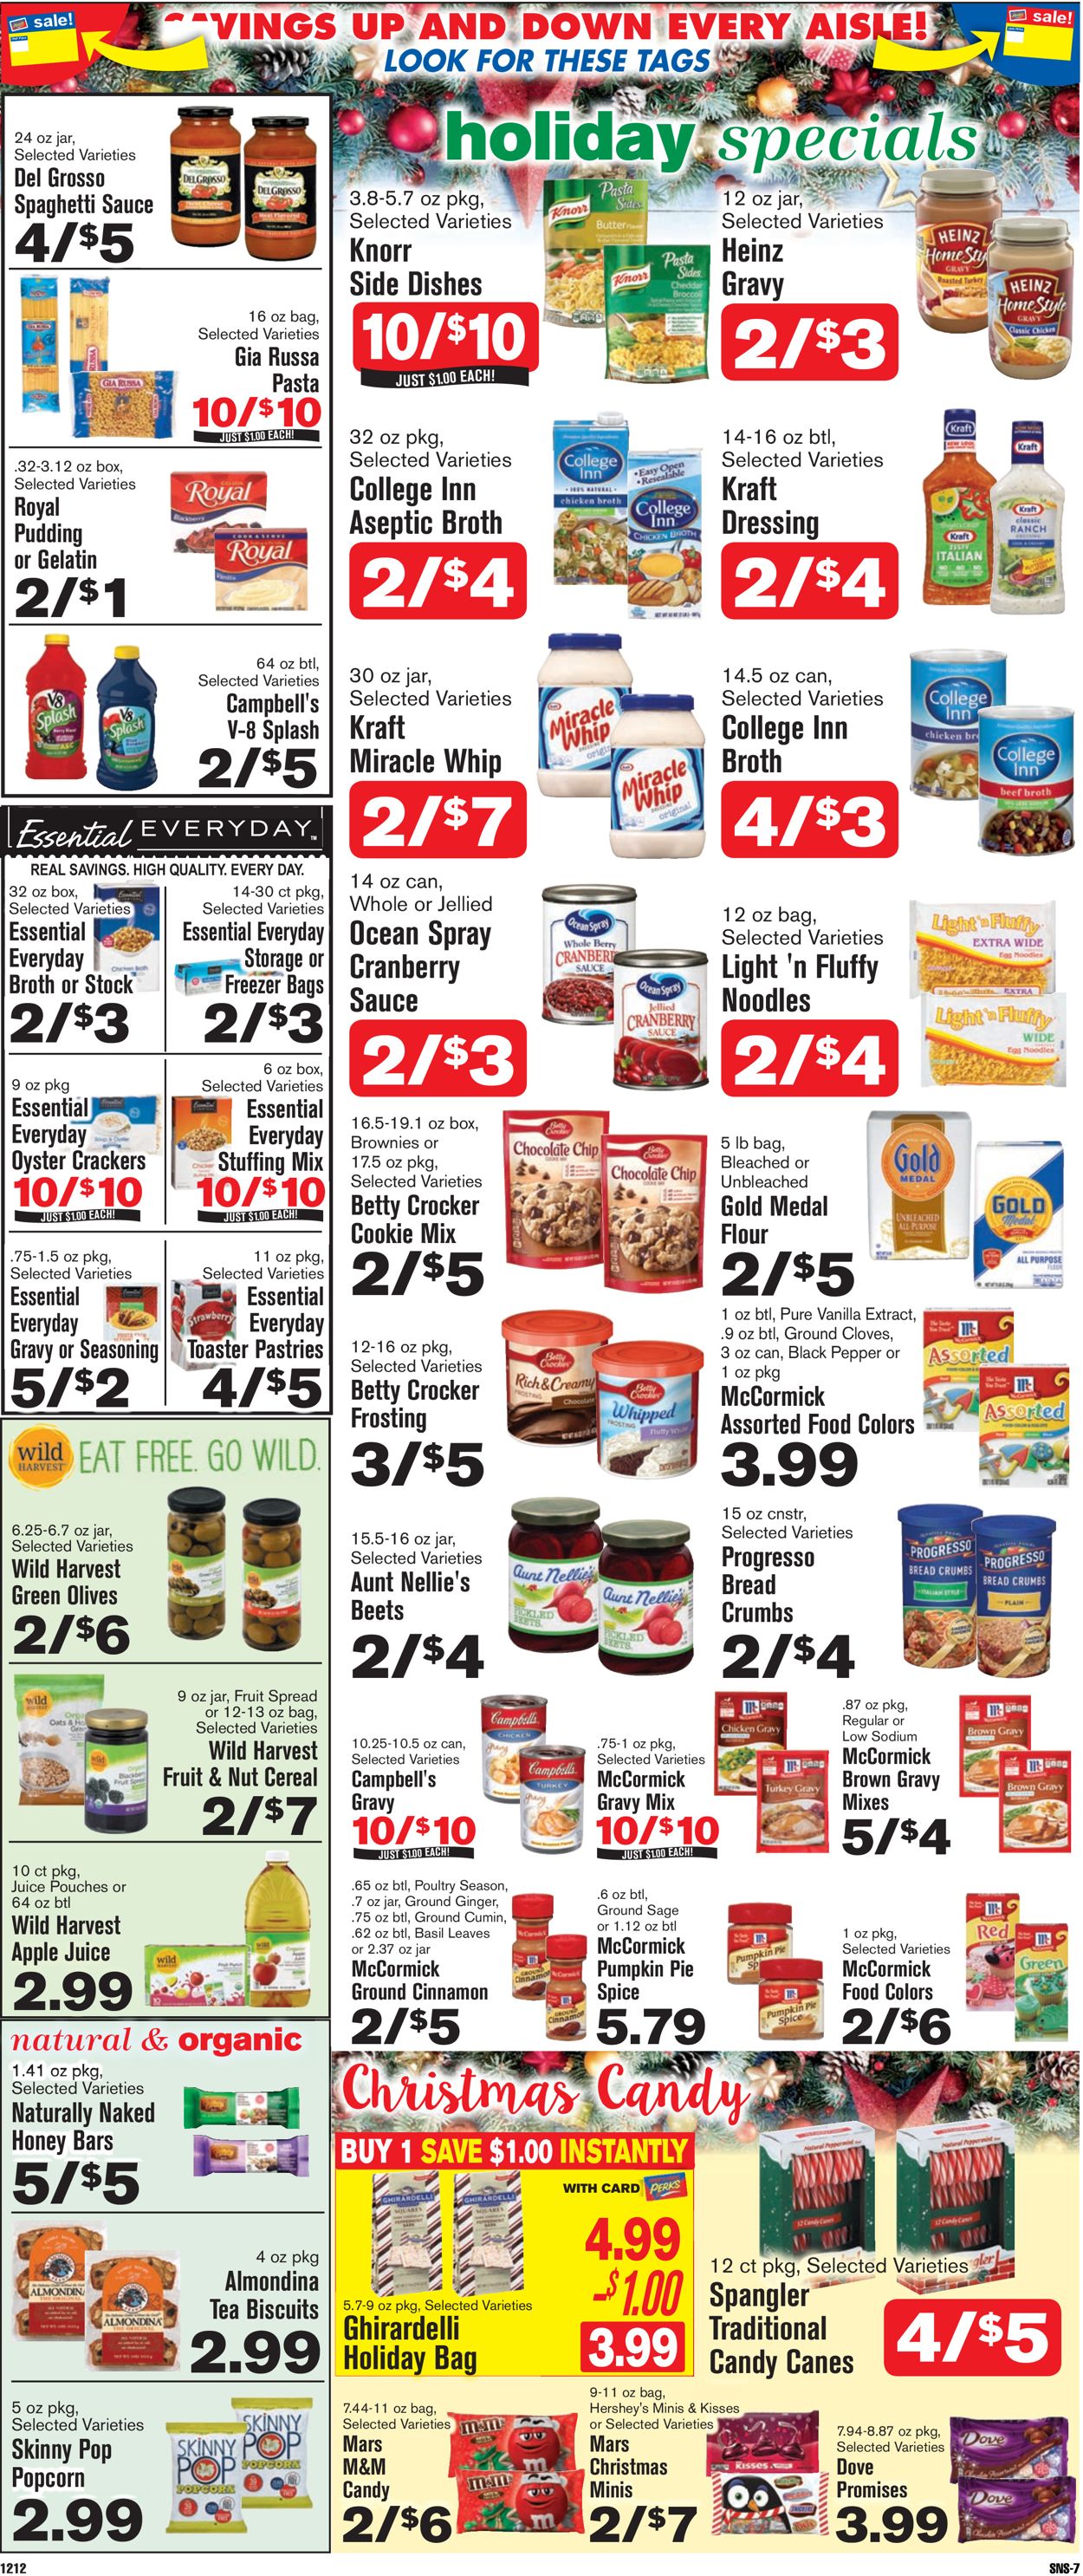 Shop ‘n Save - Holiday Ad 2019 Current weekly ad 12/12 - 12/18/2019 [7 ...